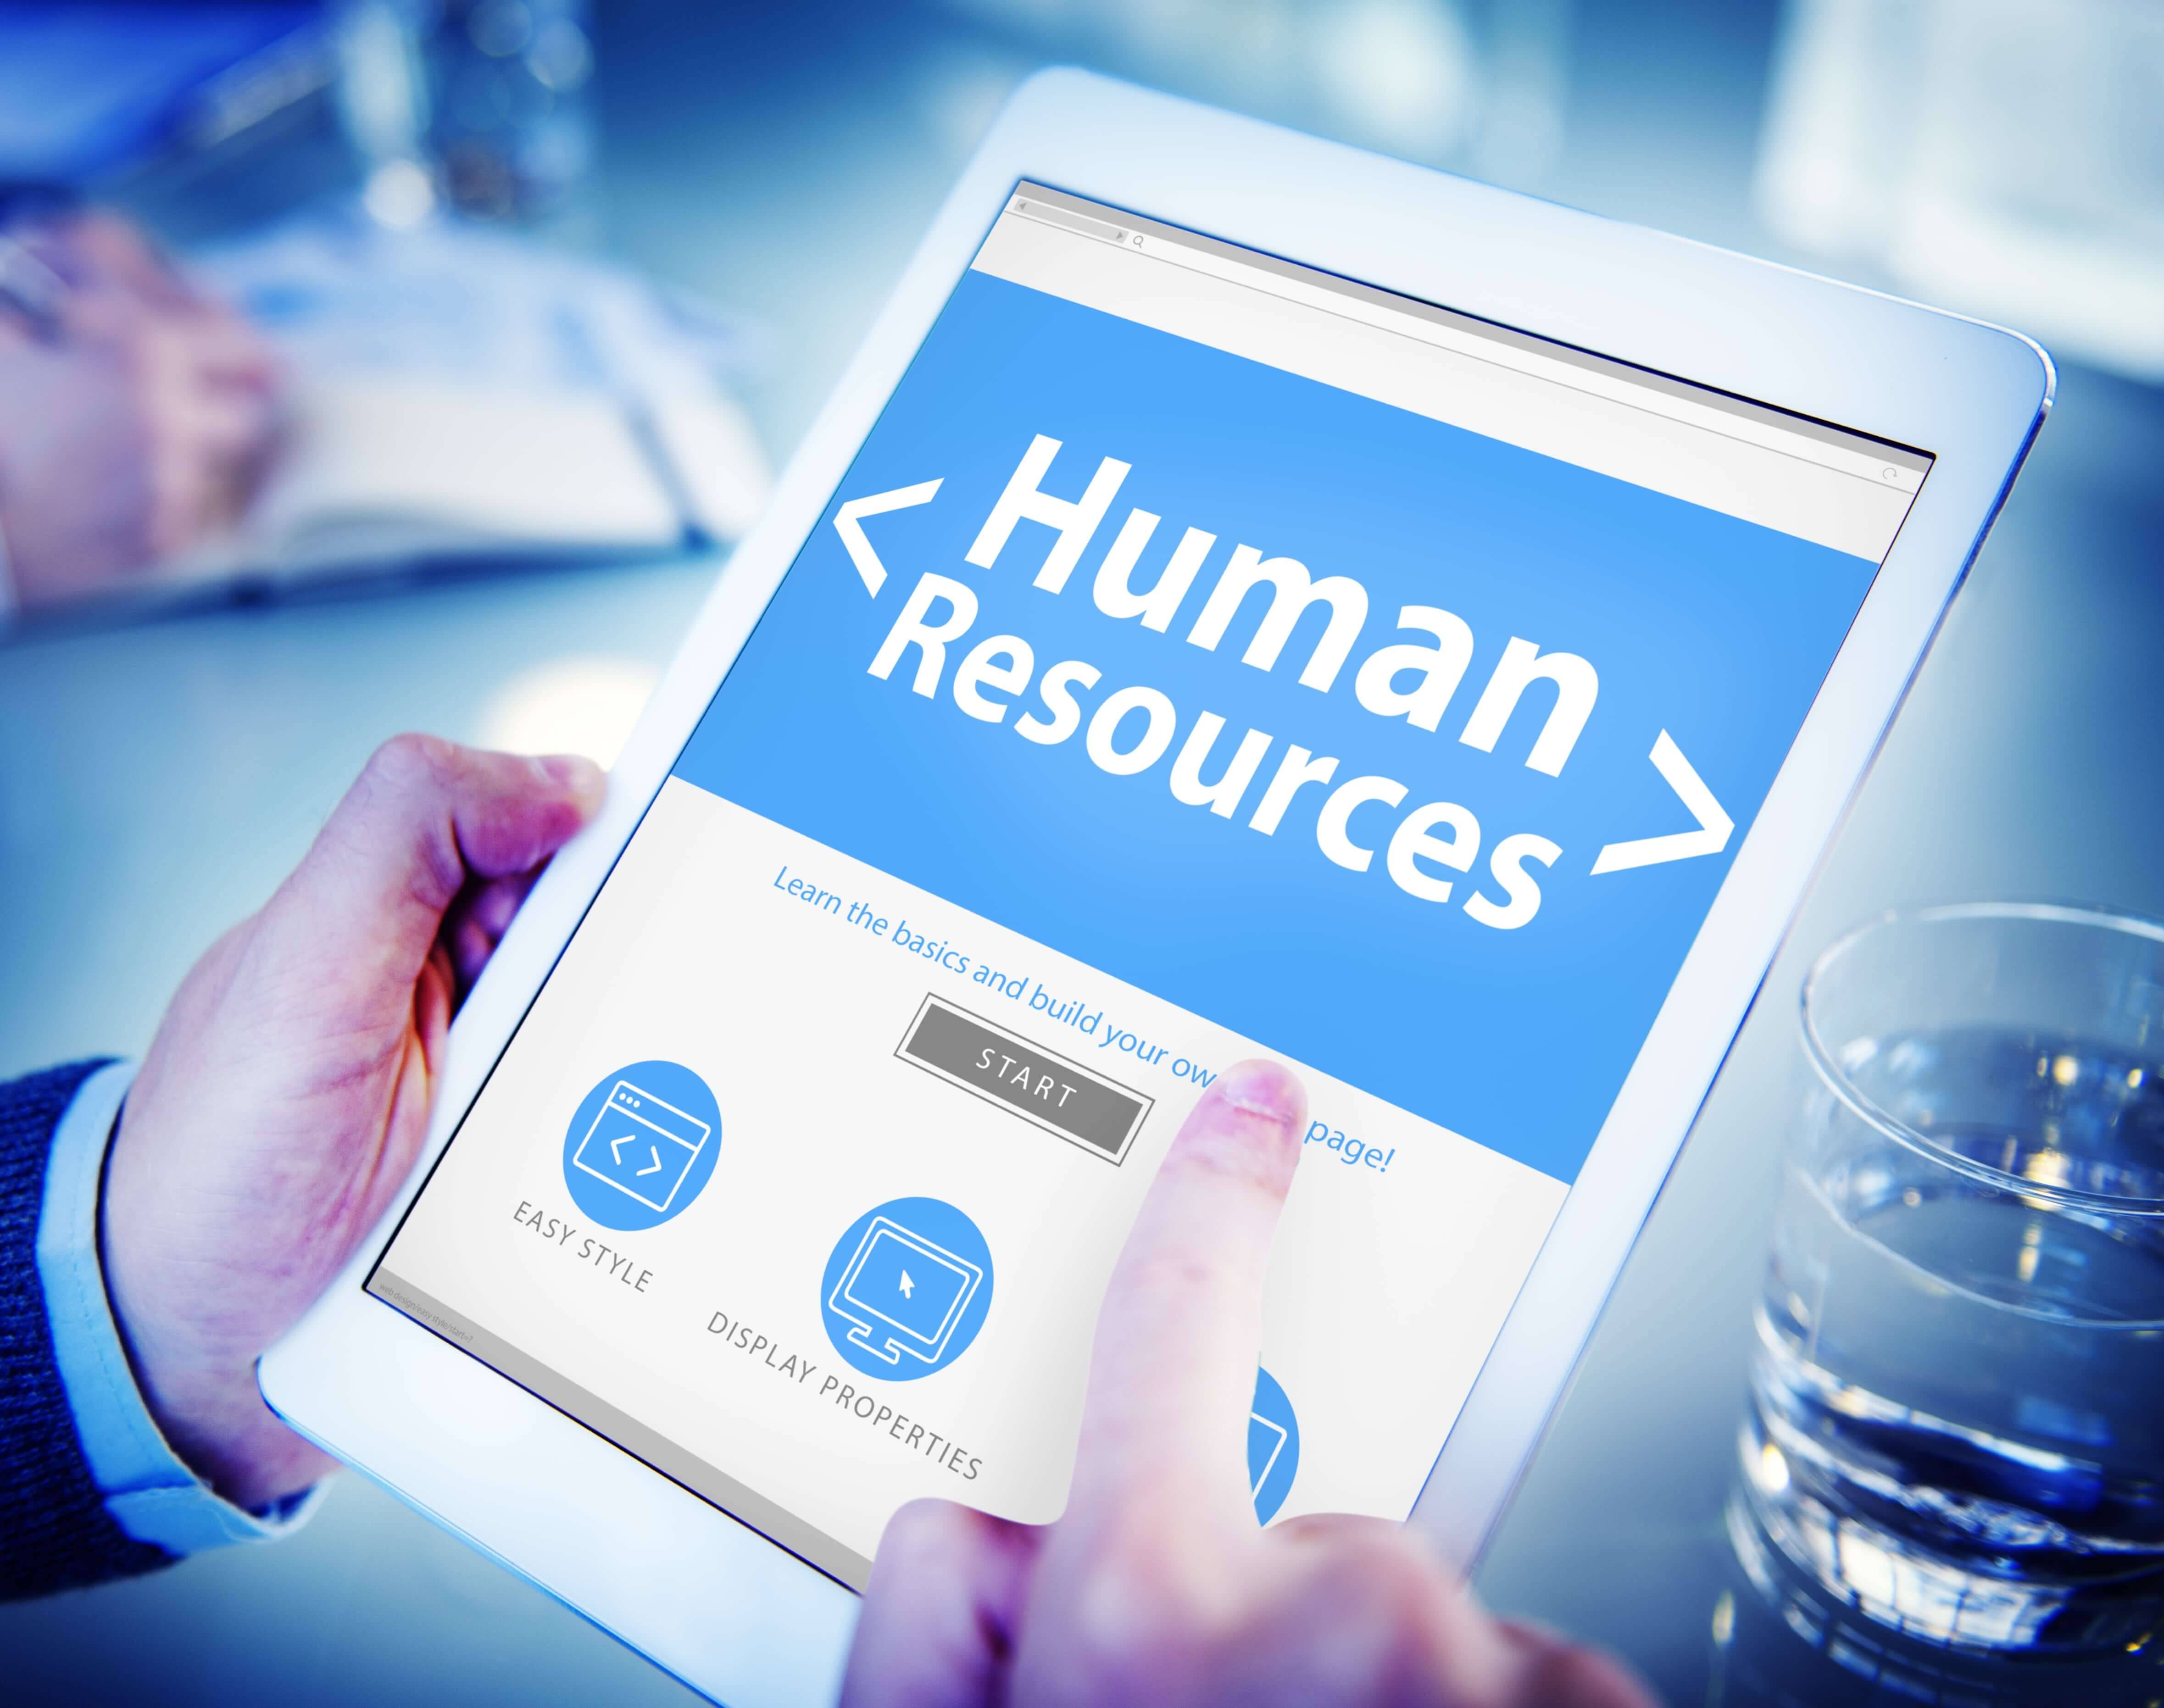 One Year Into Pandemic And This is How HR Software Has Changed Human Resources